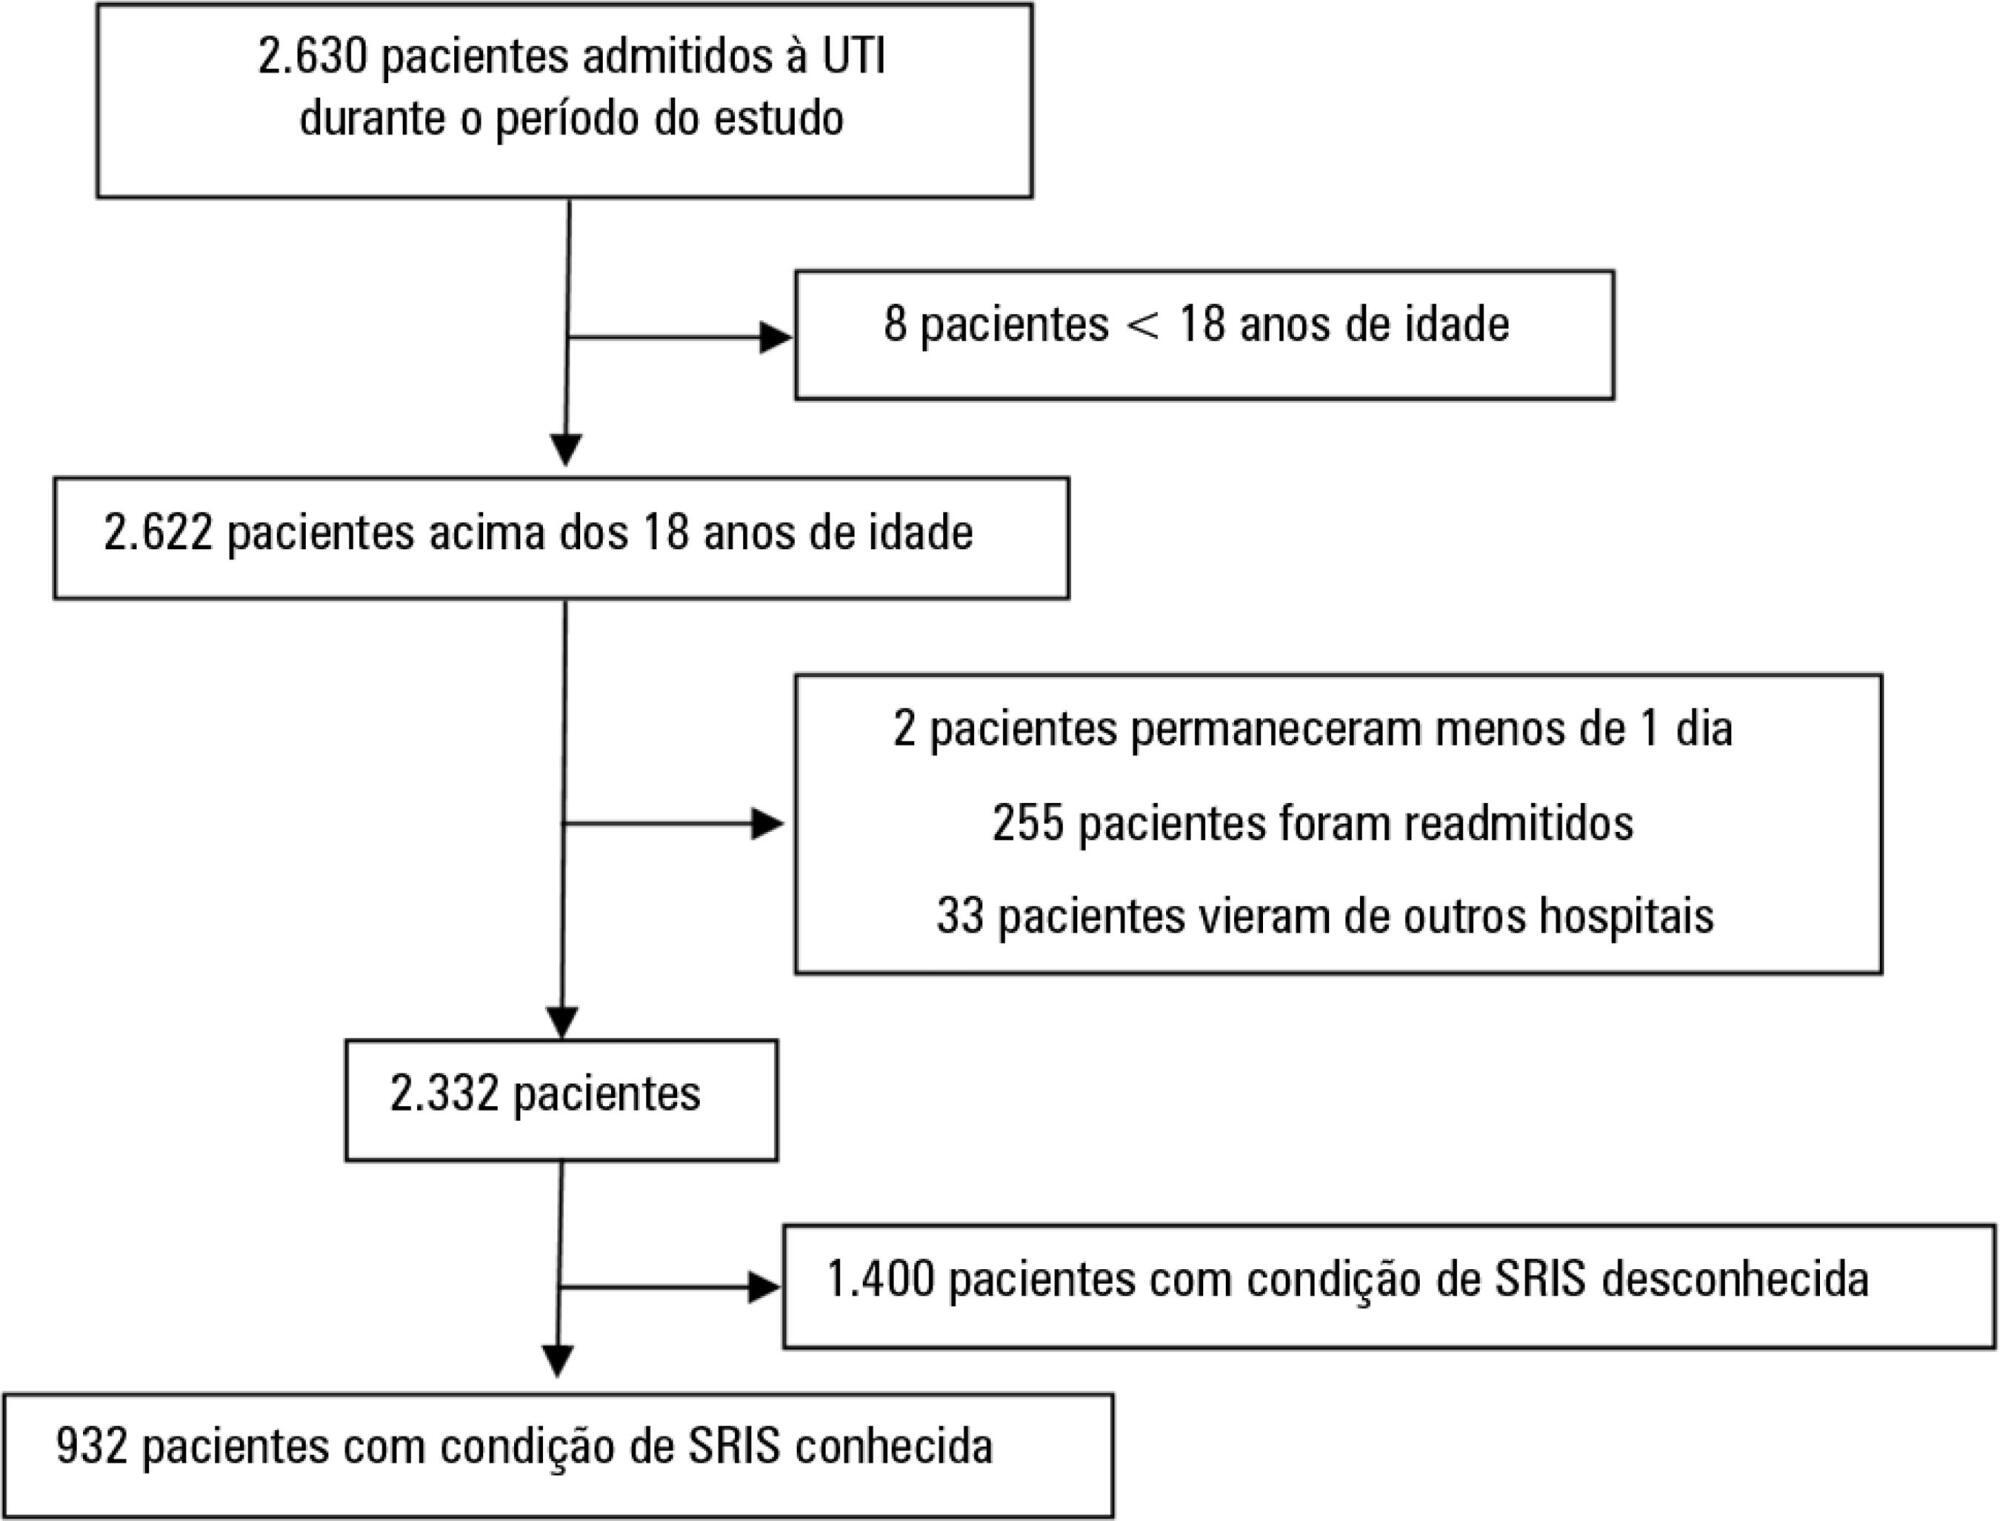 Systemic inflammatory response syndrome criteria and the prediction of hospital mortality in critically ill patients: a retrospective cohort study